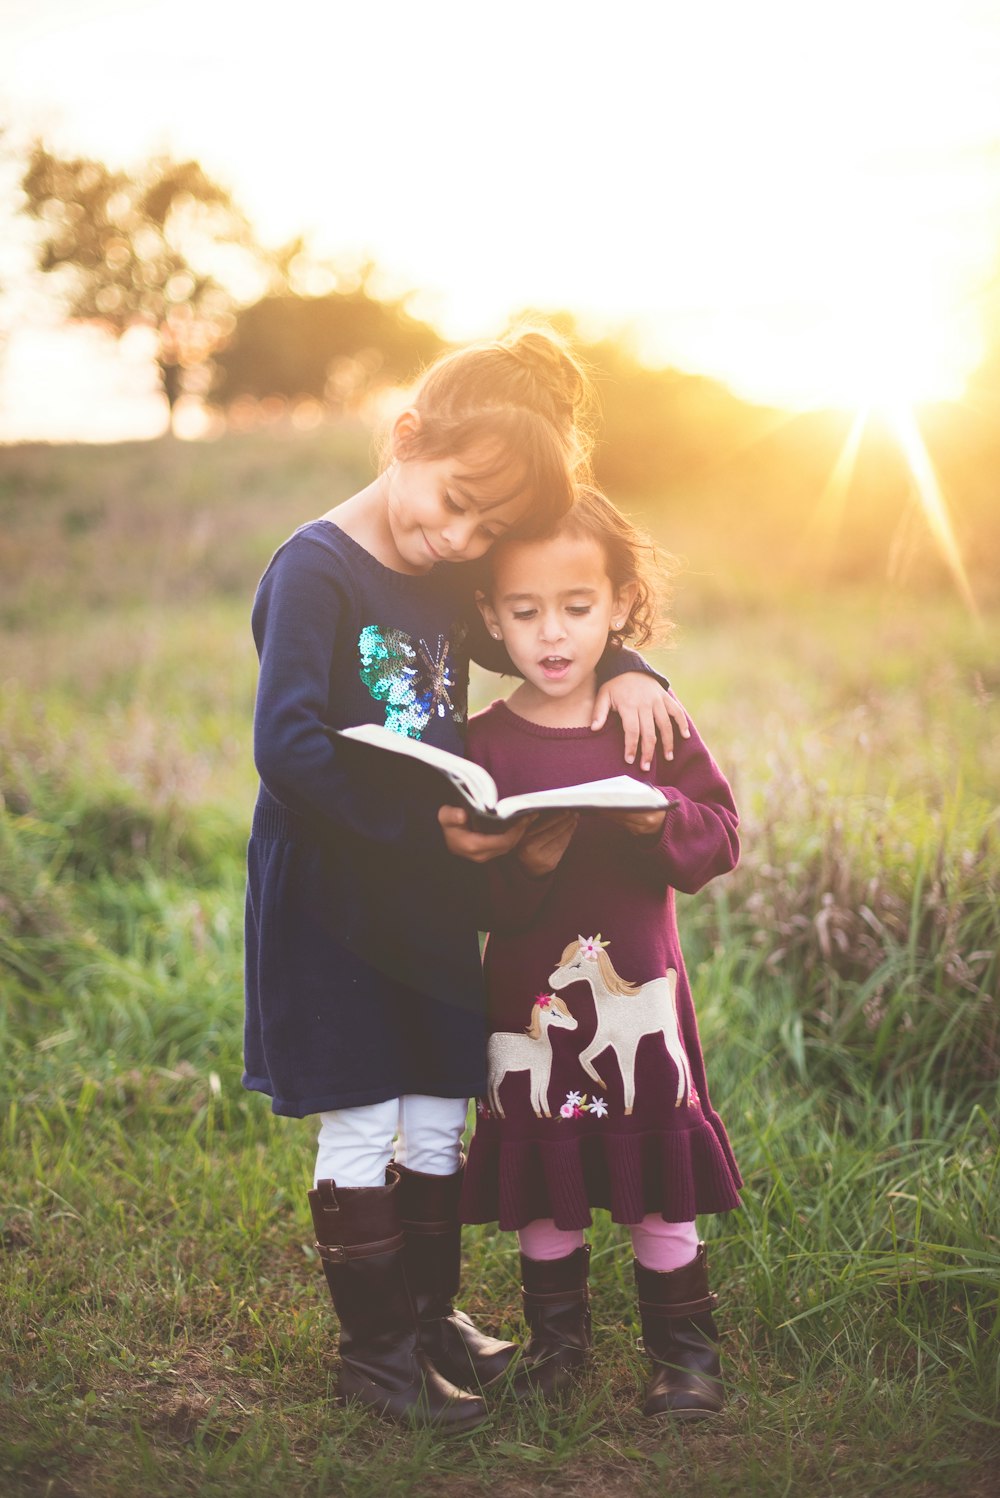 Two young girls stand reading from a book outdoors in the sun